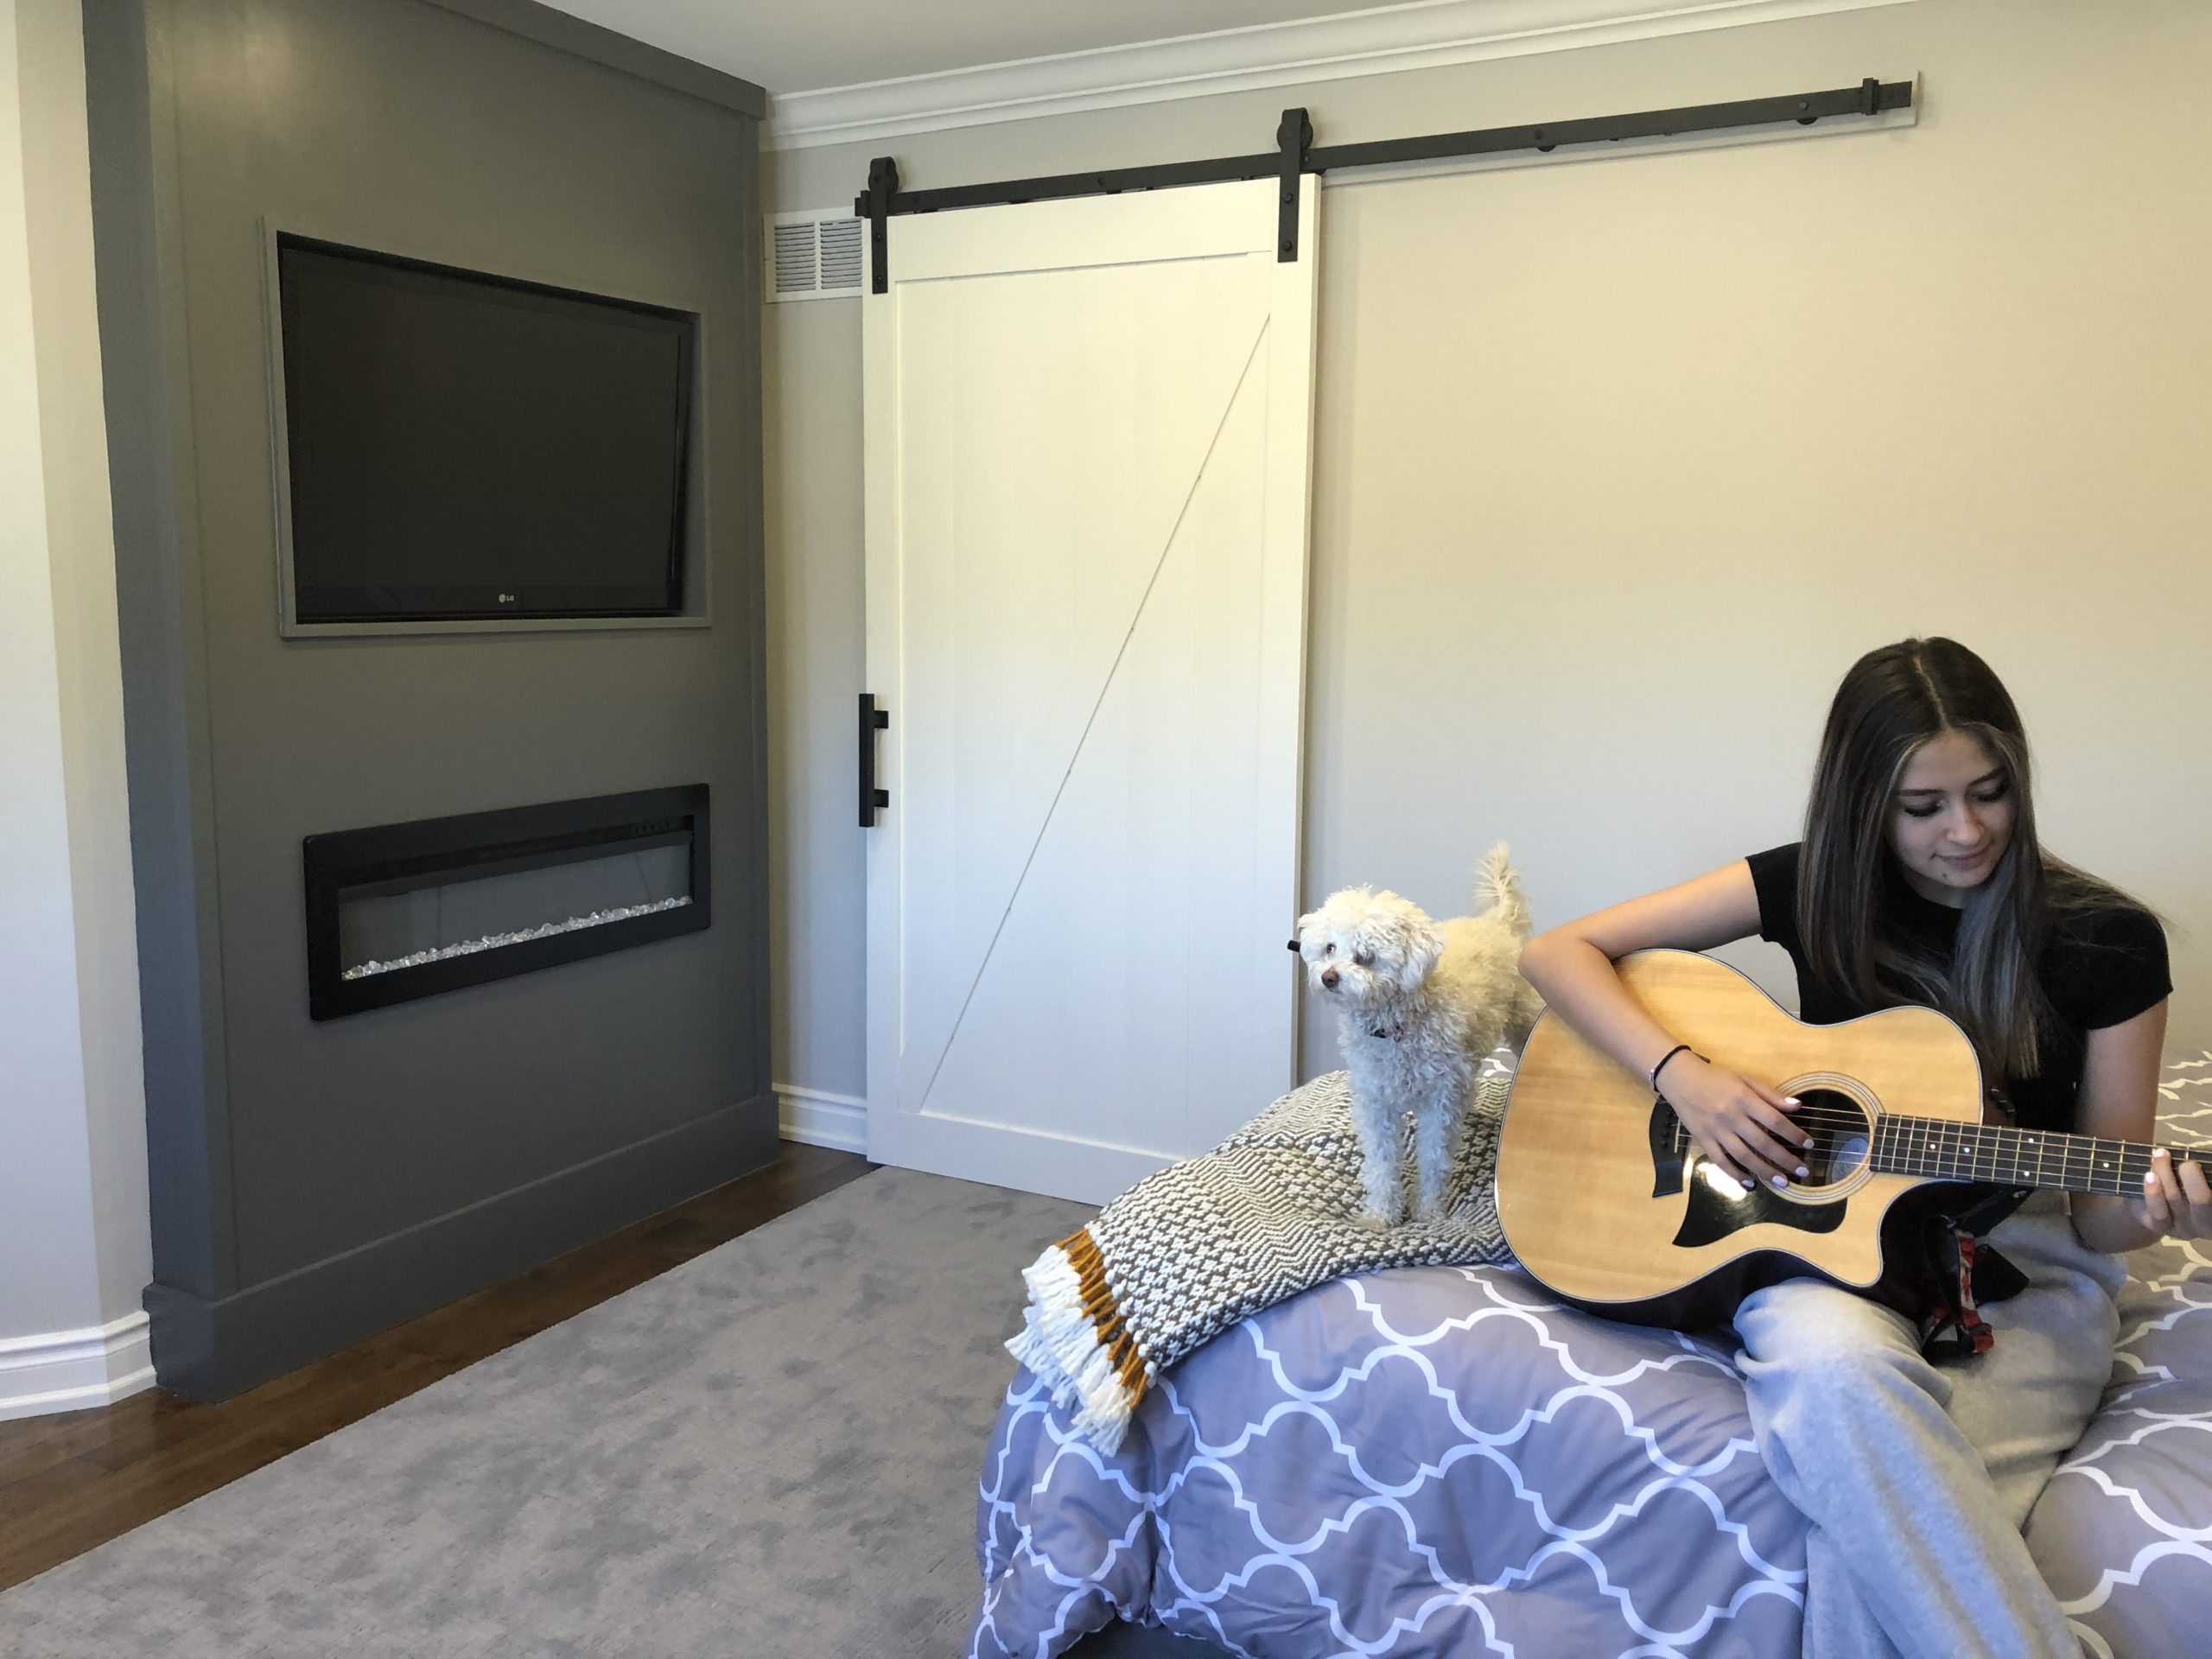 White Barn Door behind teen girl sitting with a small white dog playing guitar on her bed.